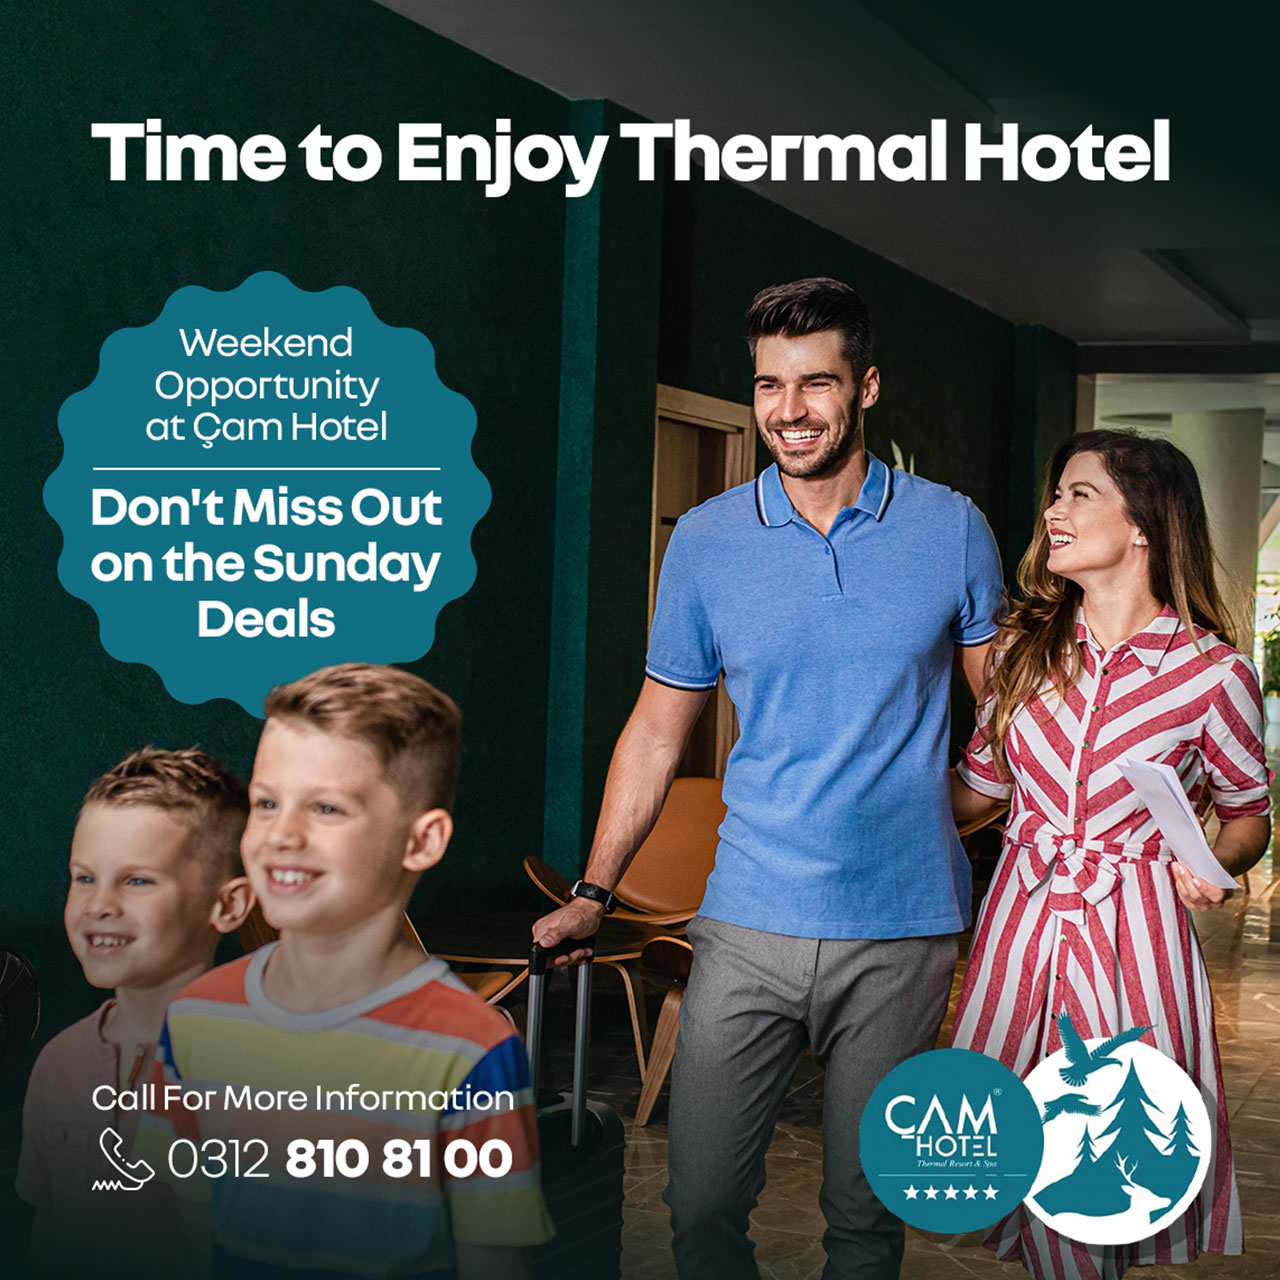 Time to Enjoy Thermal Hotel, Weekend Opportunity at Çam Hotel!